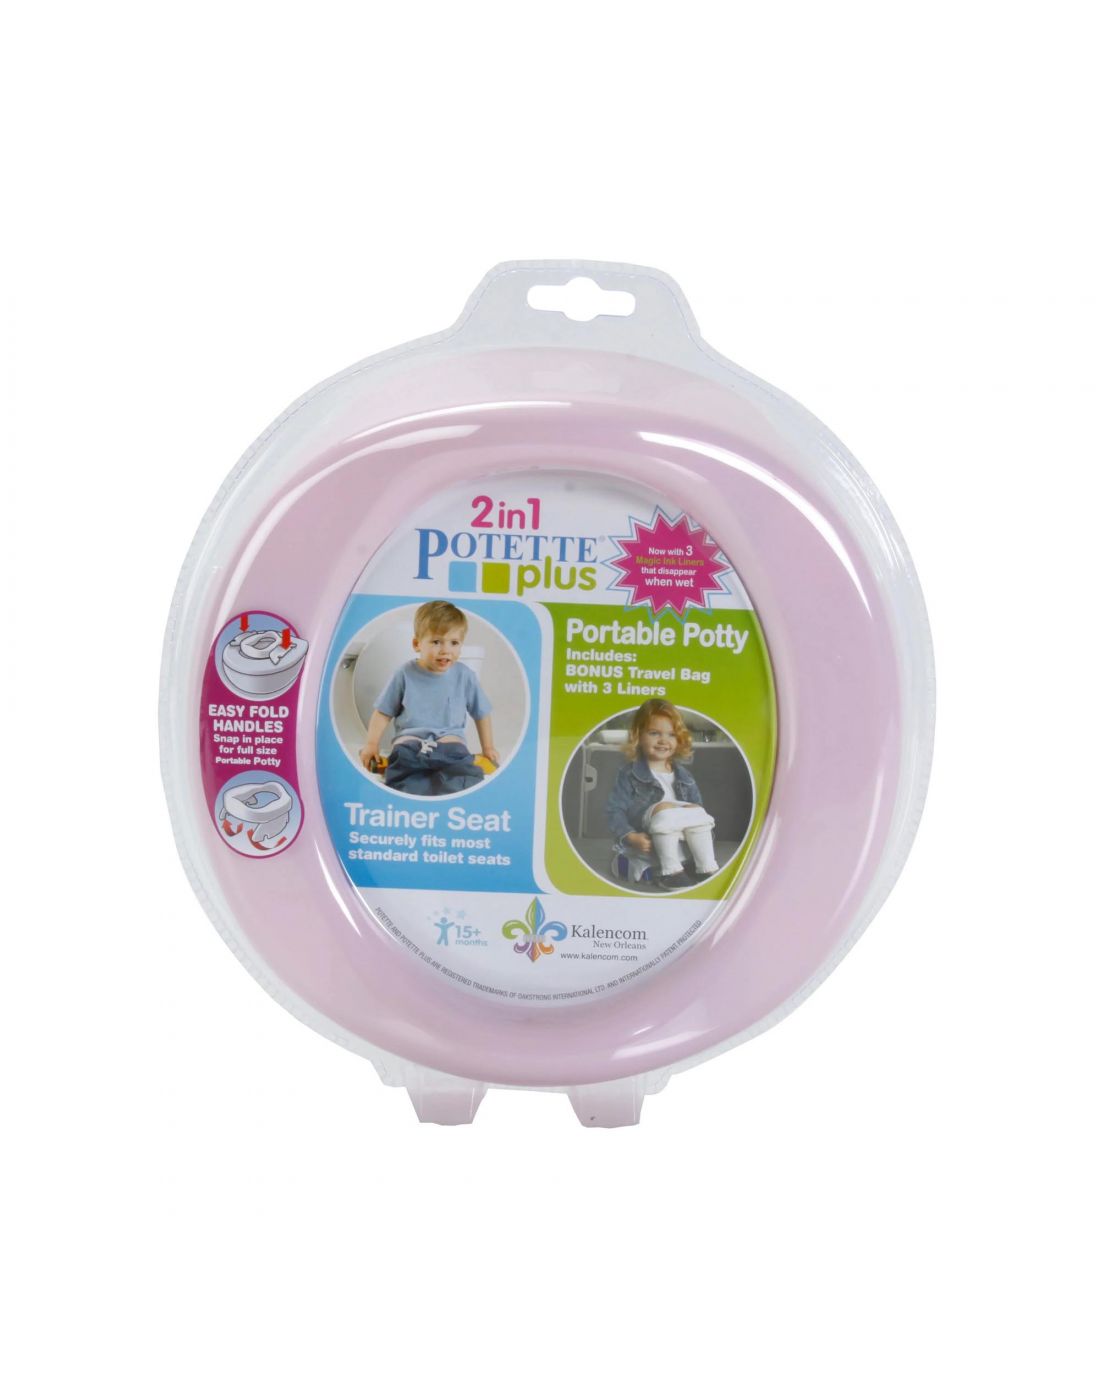 Babywise Potette Plus 2 in 1 Portable Travel potty , Pink